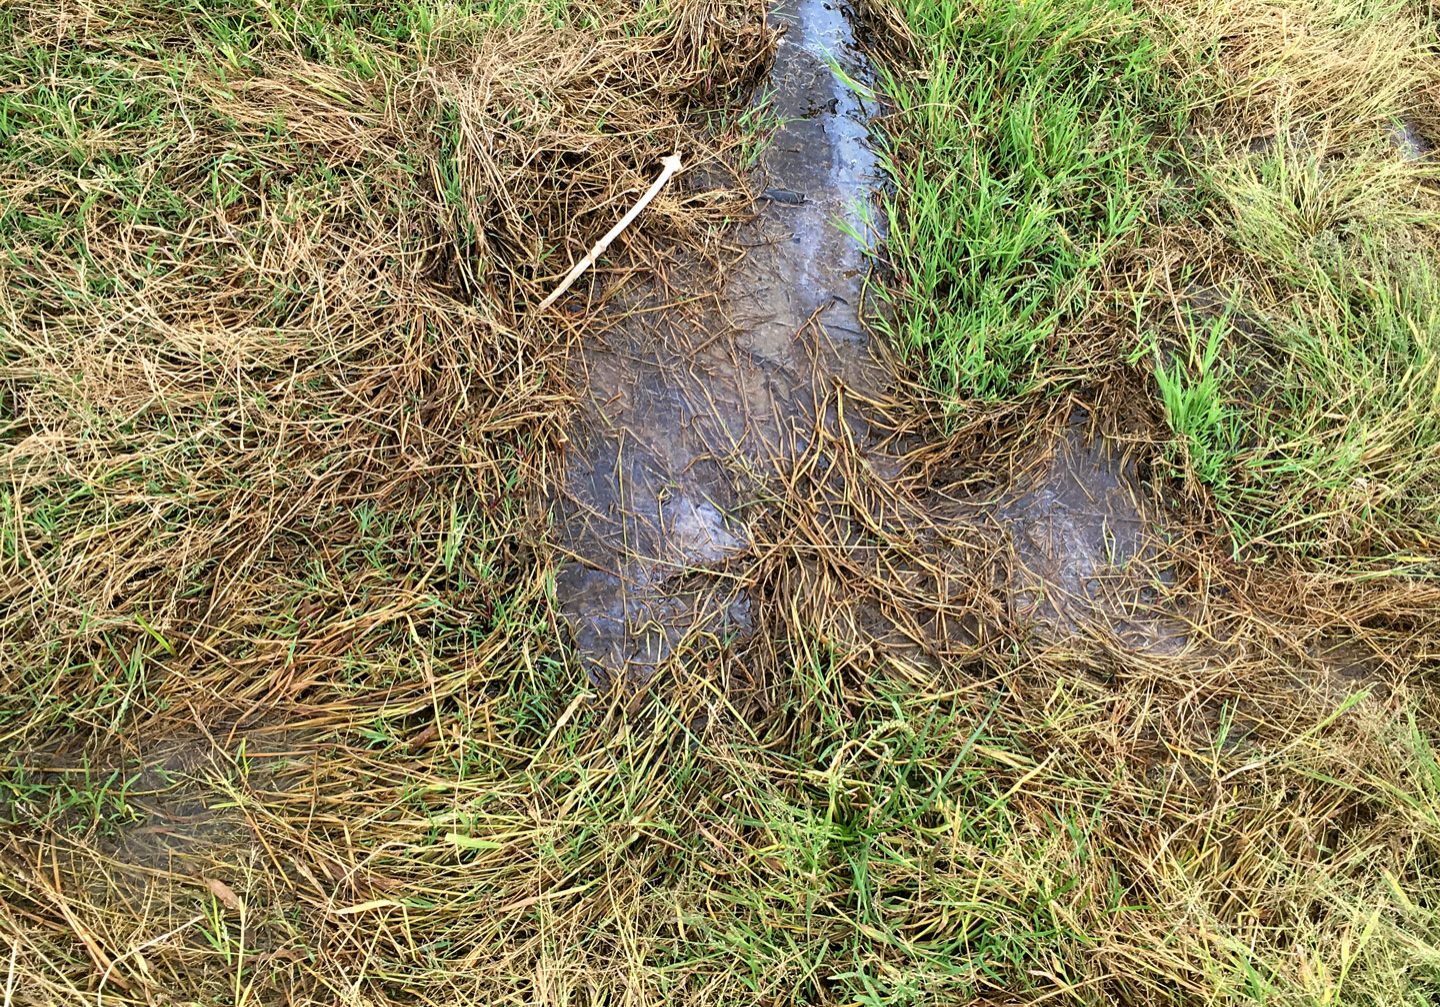 Note the oily rainbow sheen on the surface of this polluted water, bubbling up from underground adjacent to the old toilet block among thick marshy meadow grass, being fed by unidentified nutrients.